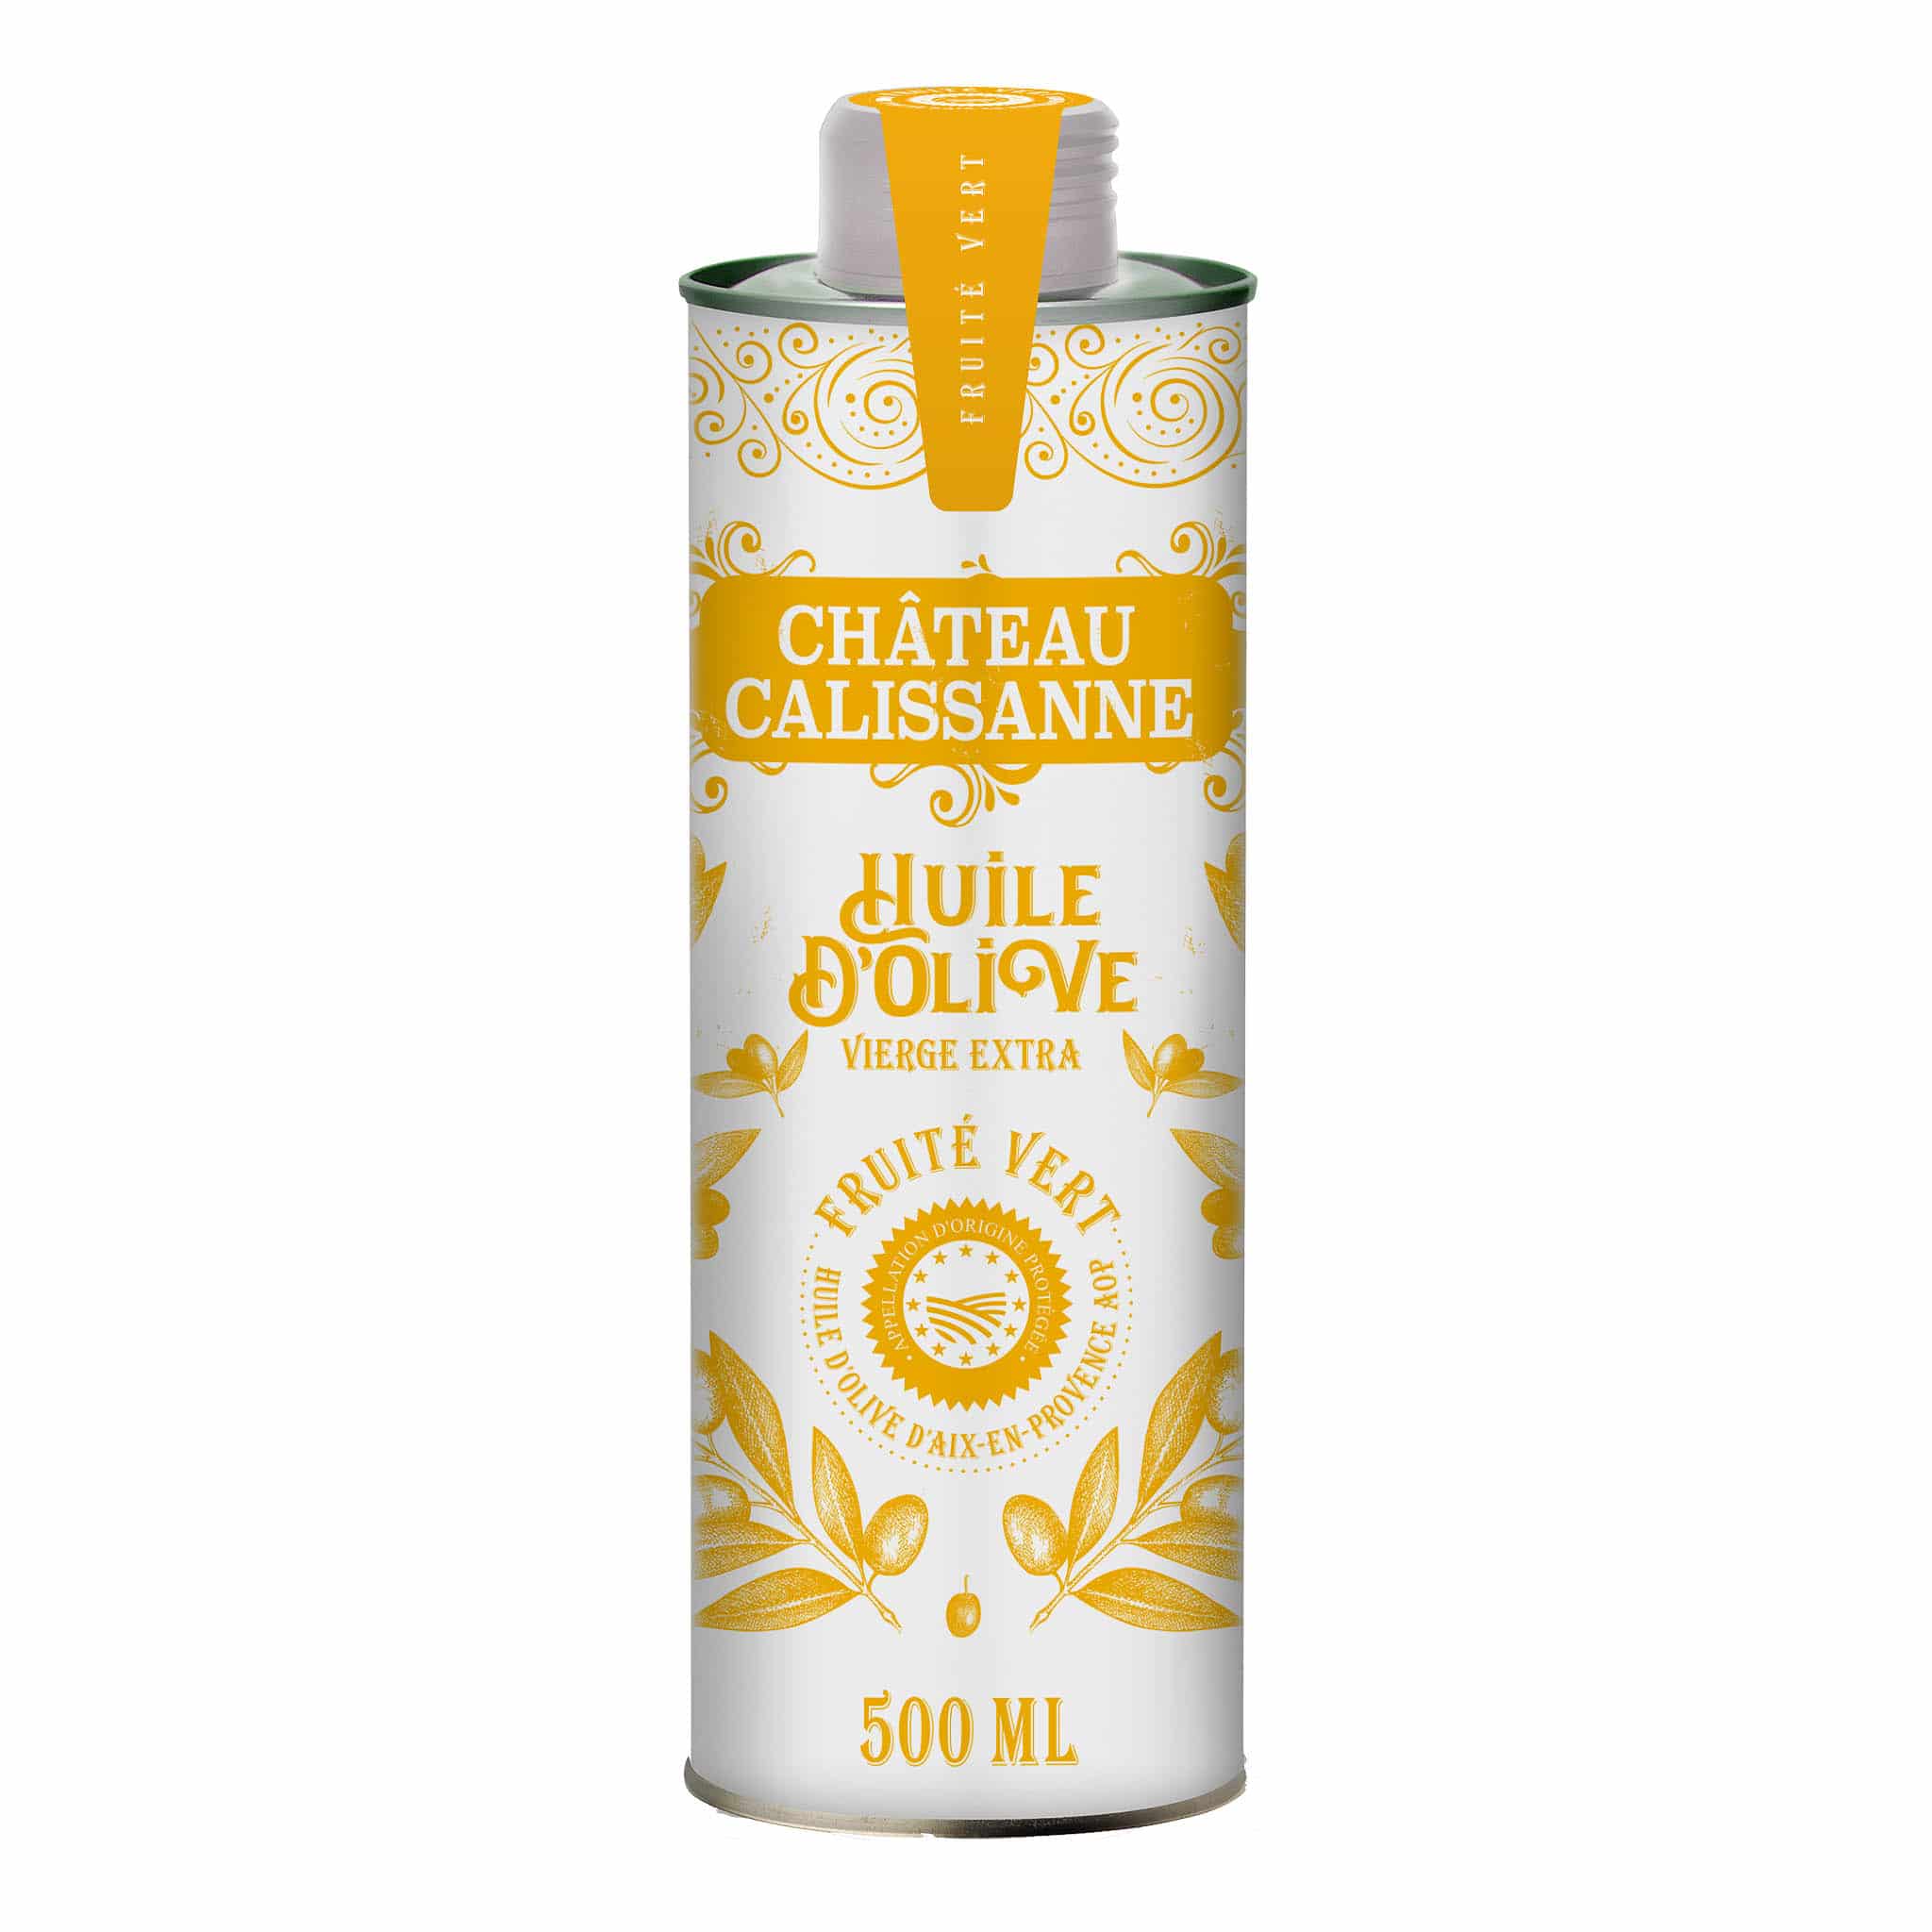 Chateau Calissanne Green Fruity Extra Virgin Olive Oil in Yellow Tin, 500ml